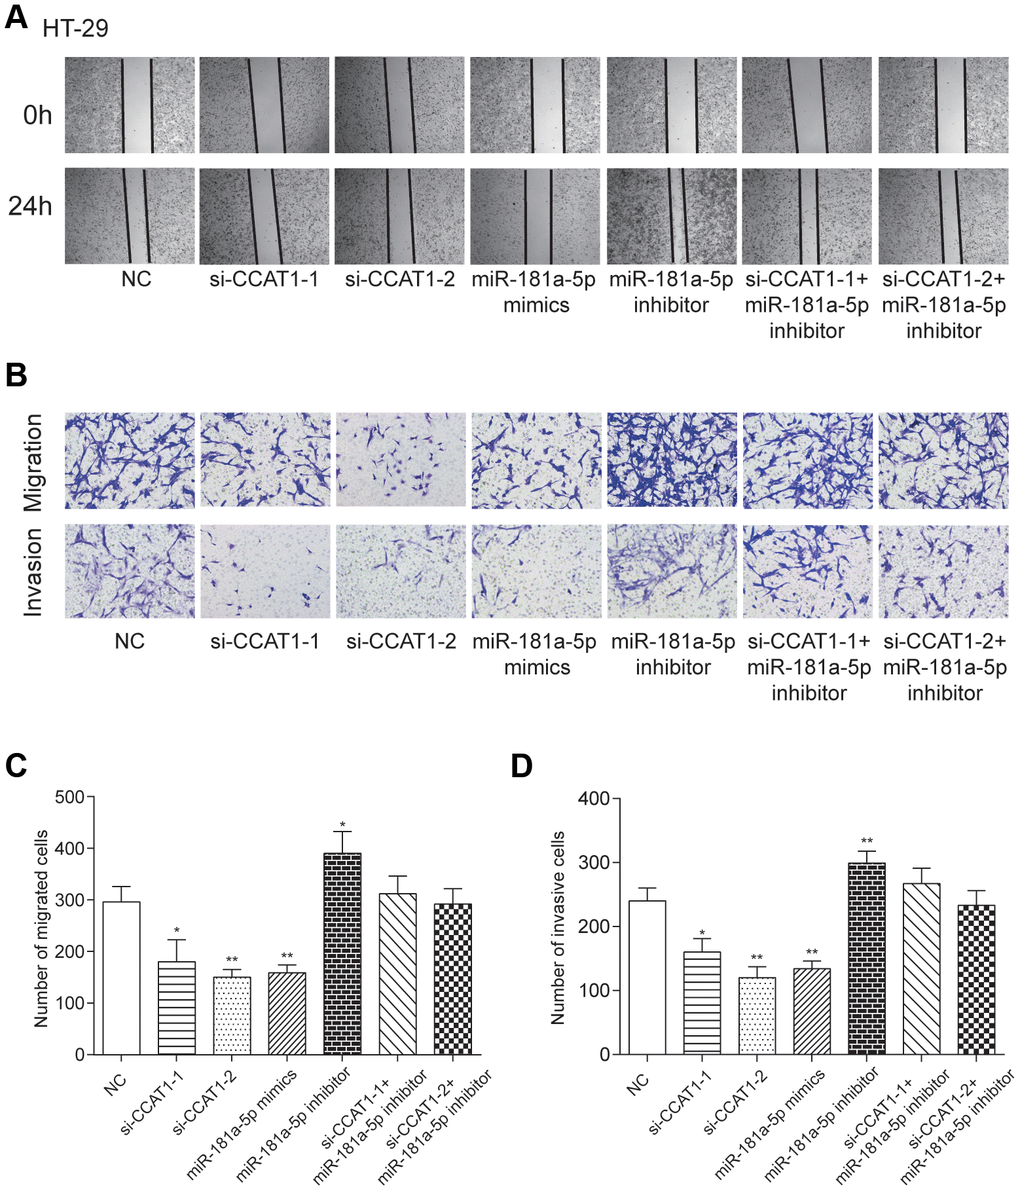 LncRNA CCAT1 increased migration and invasion capabilities of CRC cells by targeting miR-181a-5p. (A) Scratch-wound healing assay was used to assess the migration potency of HT-29 cells after being transfected. (B–D) Relative migration and invasion cell numbers of HT-29 cells transfected with si-CCAT1-1, si-CCAT1-2 or miR-181a-5p mimics detected by transwell assay significantly decreased. *P**P